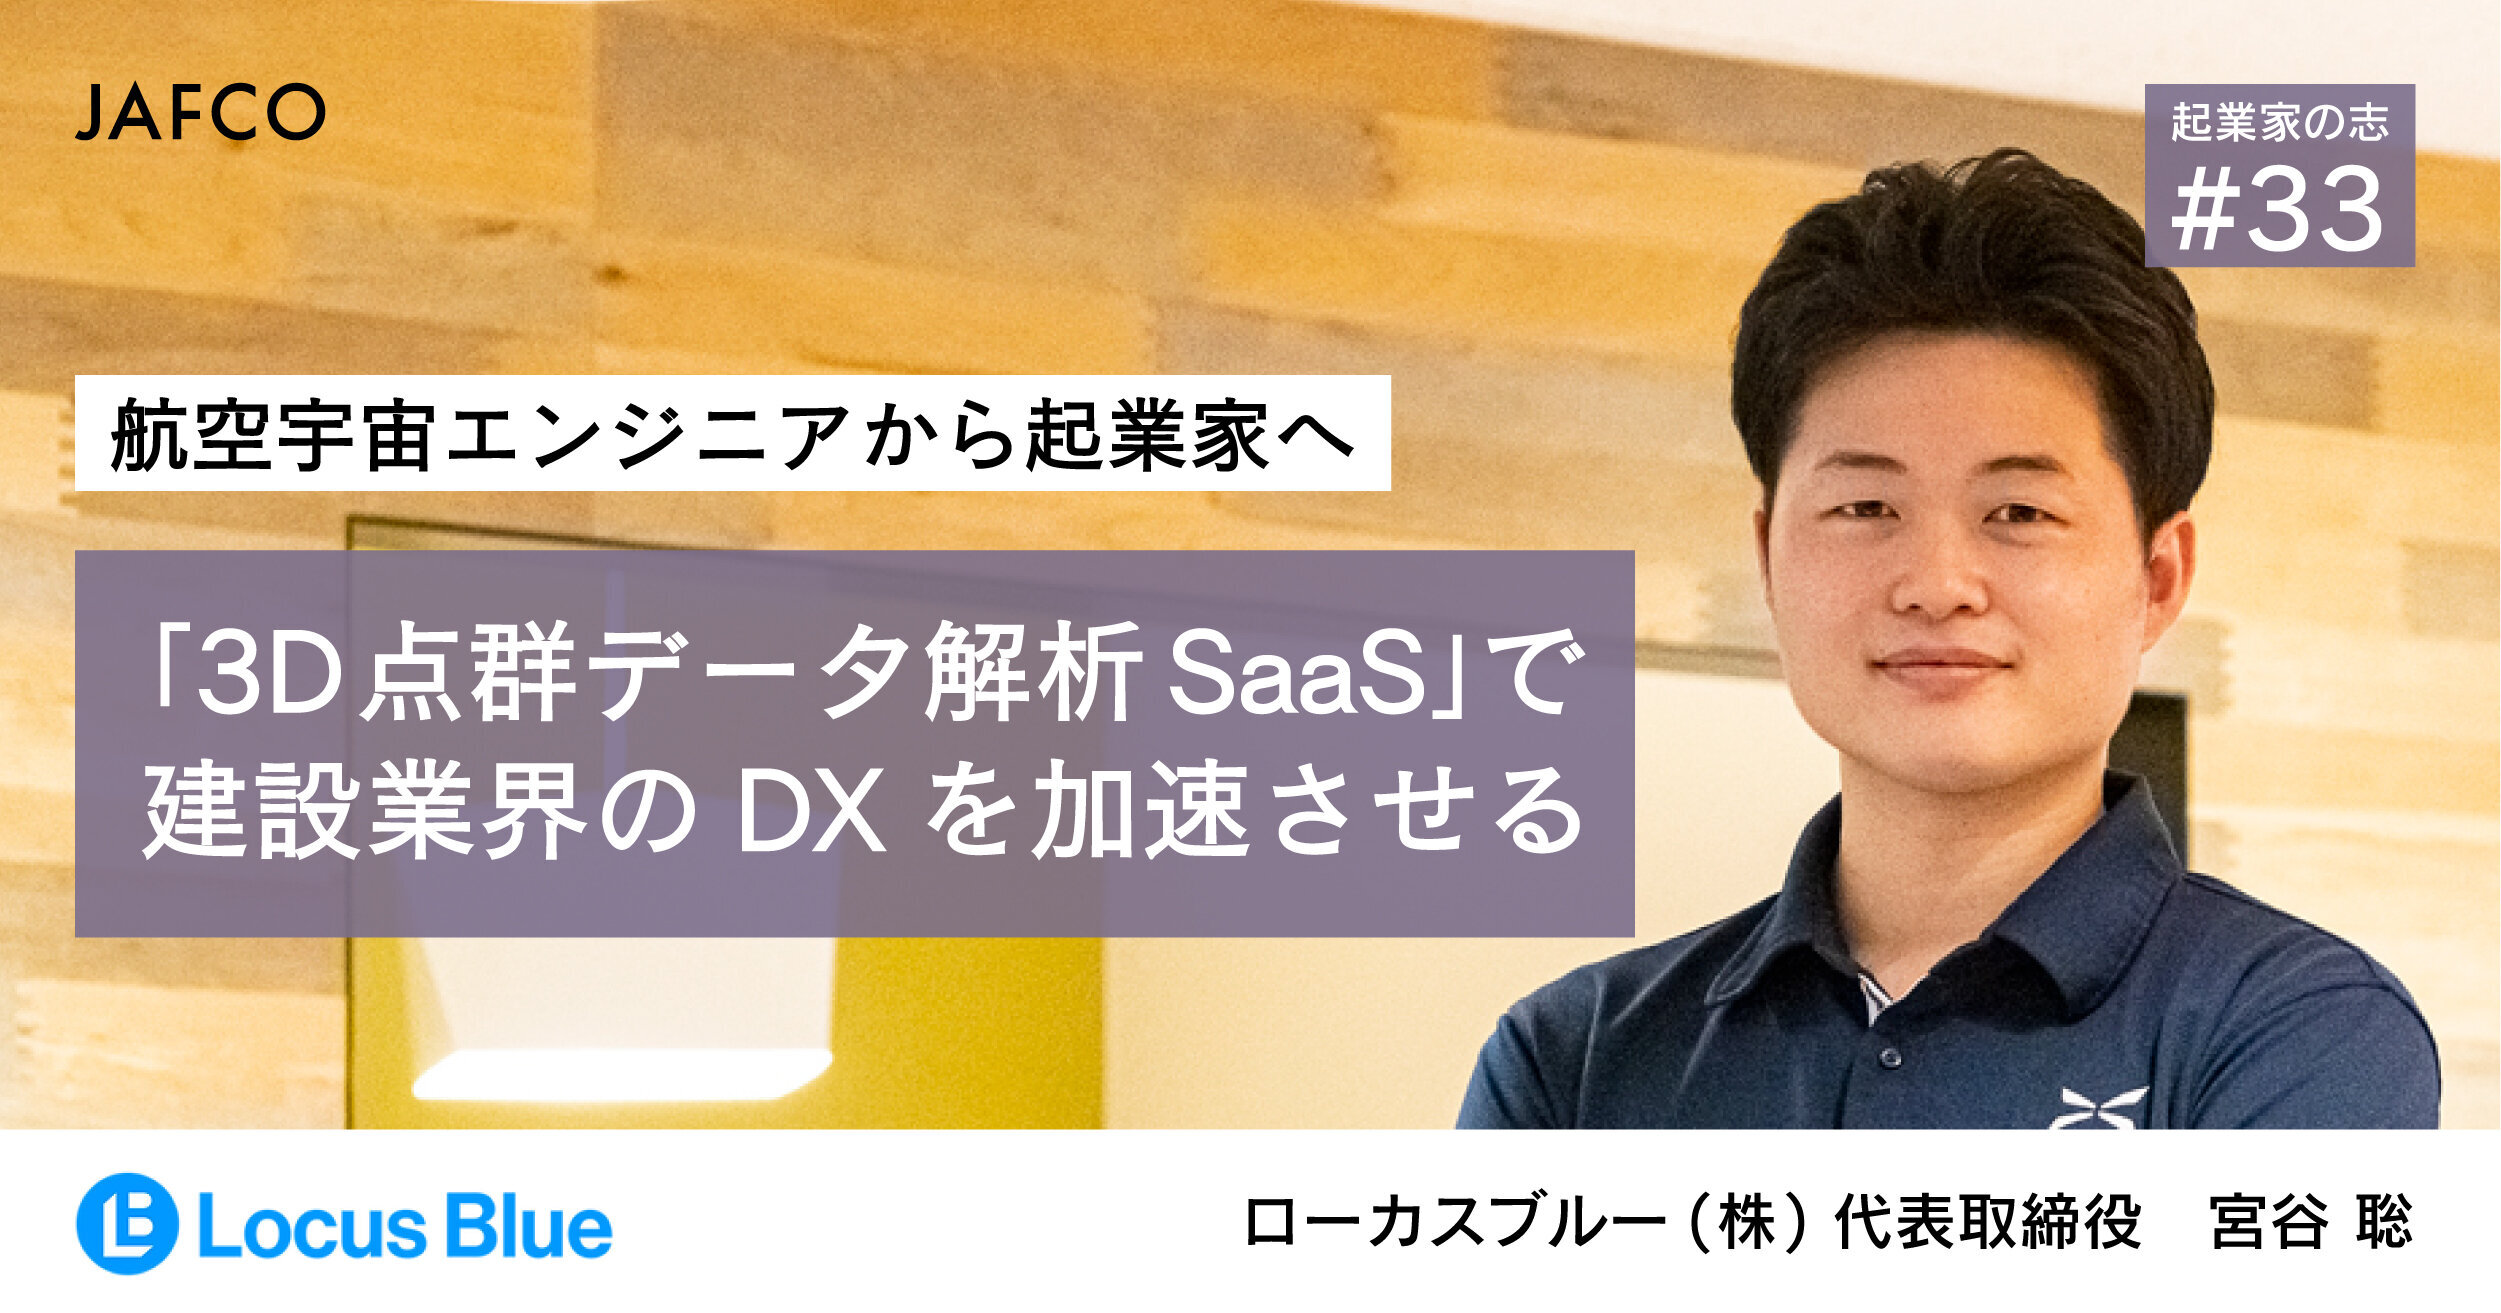 From Aerospace Engineer to Entrepreneur; Accelerating DX in the Construction Industry with "3D Point Cloud Data Analysis SaaS"